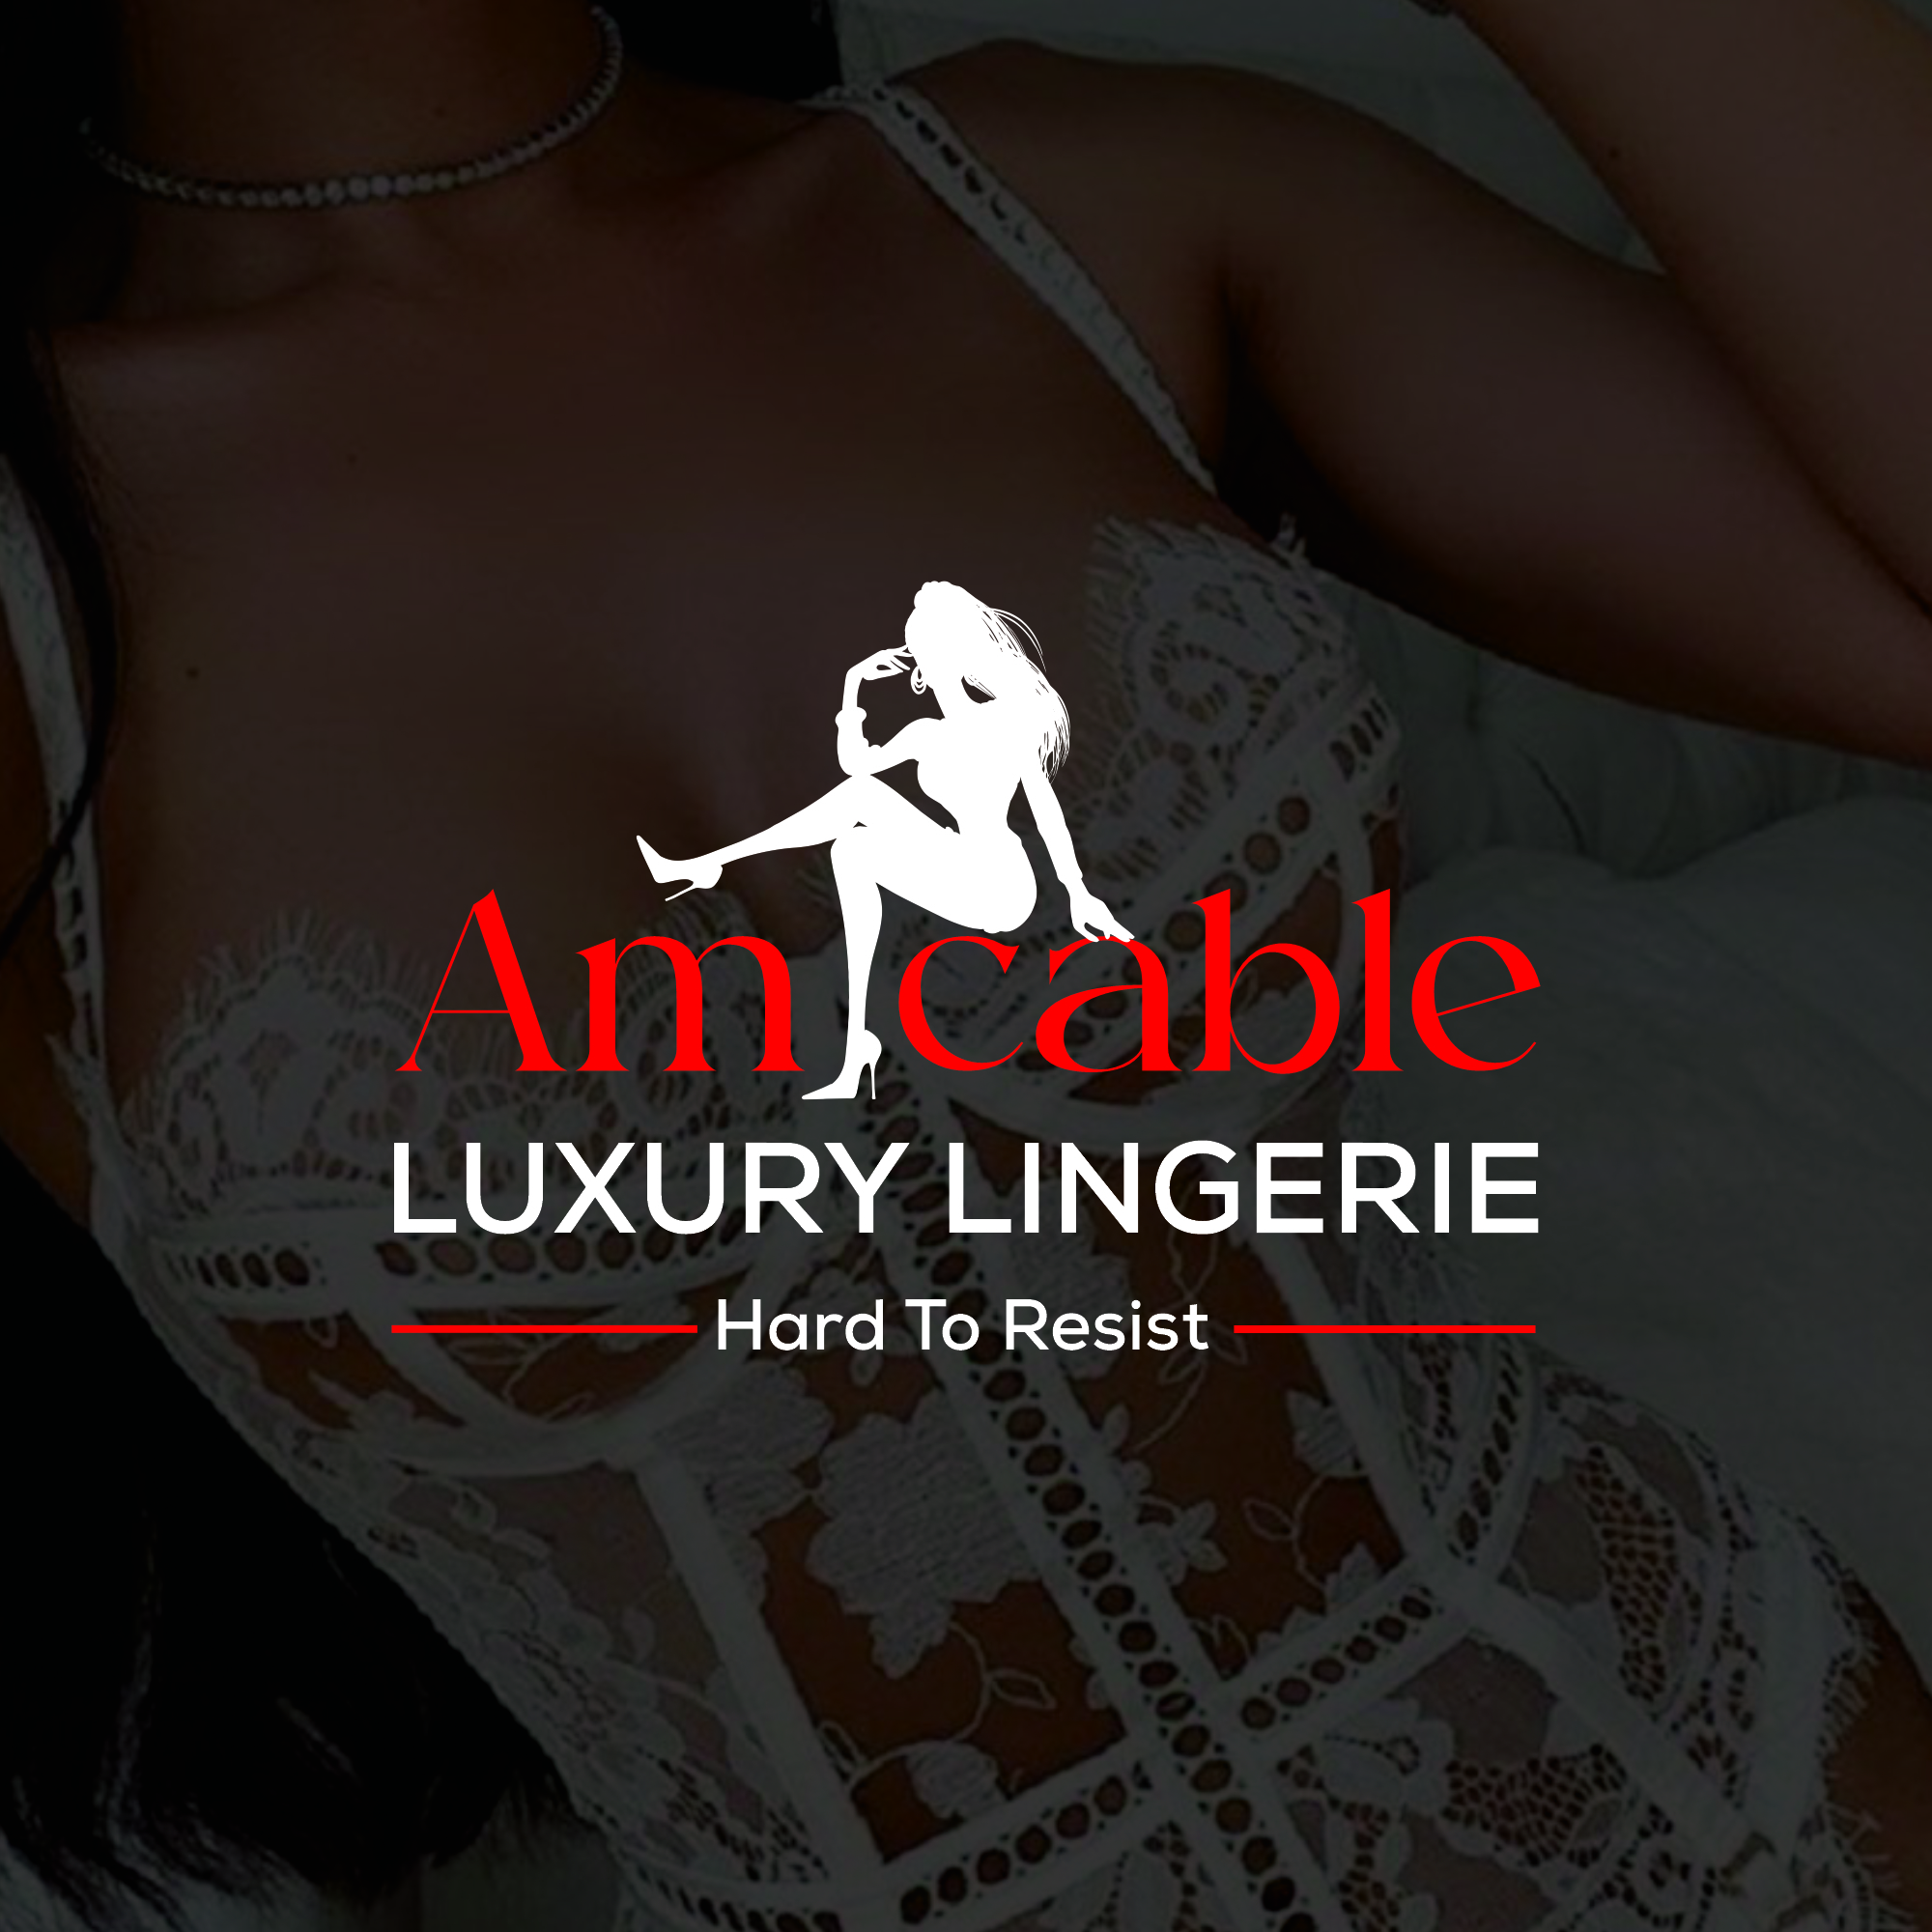 Amicable Luxury Lingerie